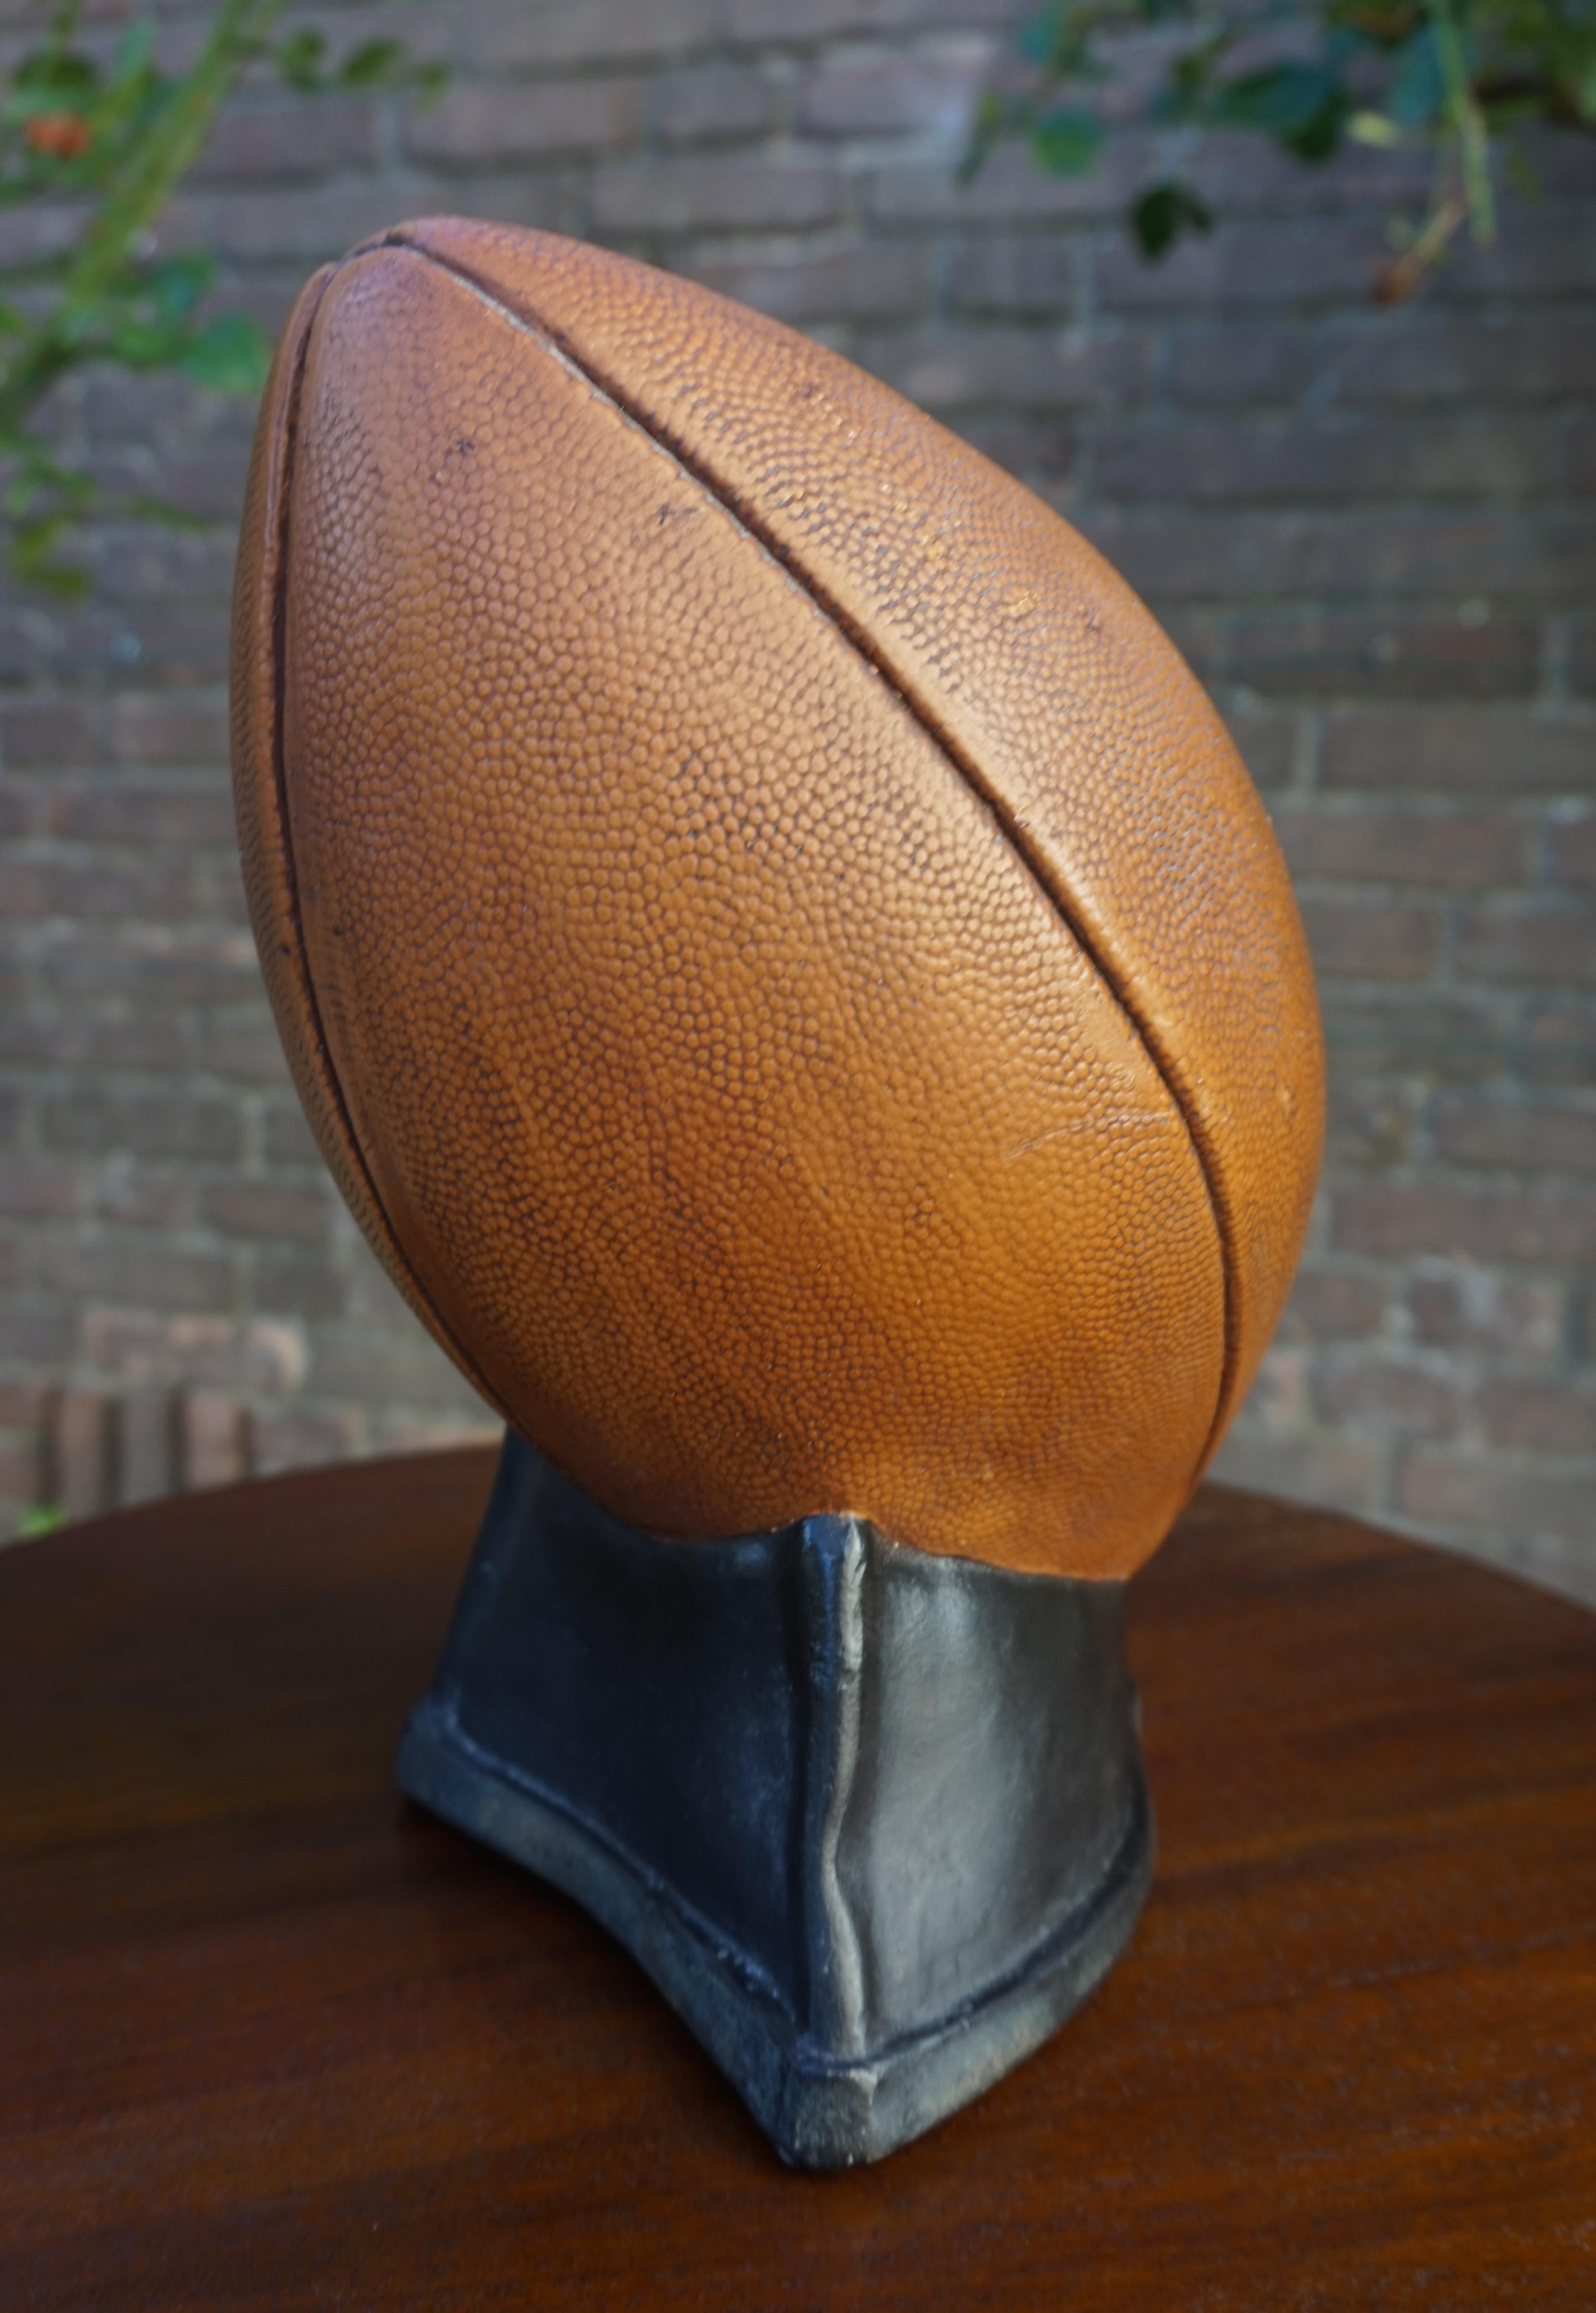 Vintage & Very Realistic Football Money Box Moneybox of Hand-Painted Plaster 3